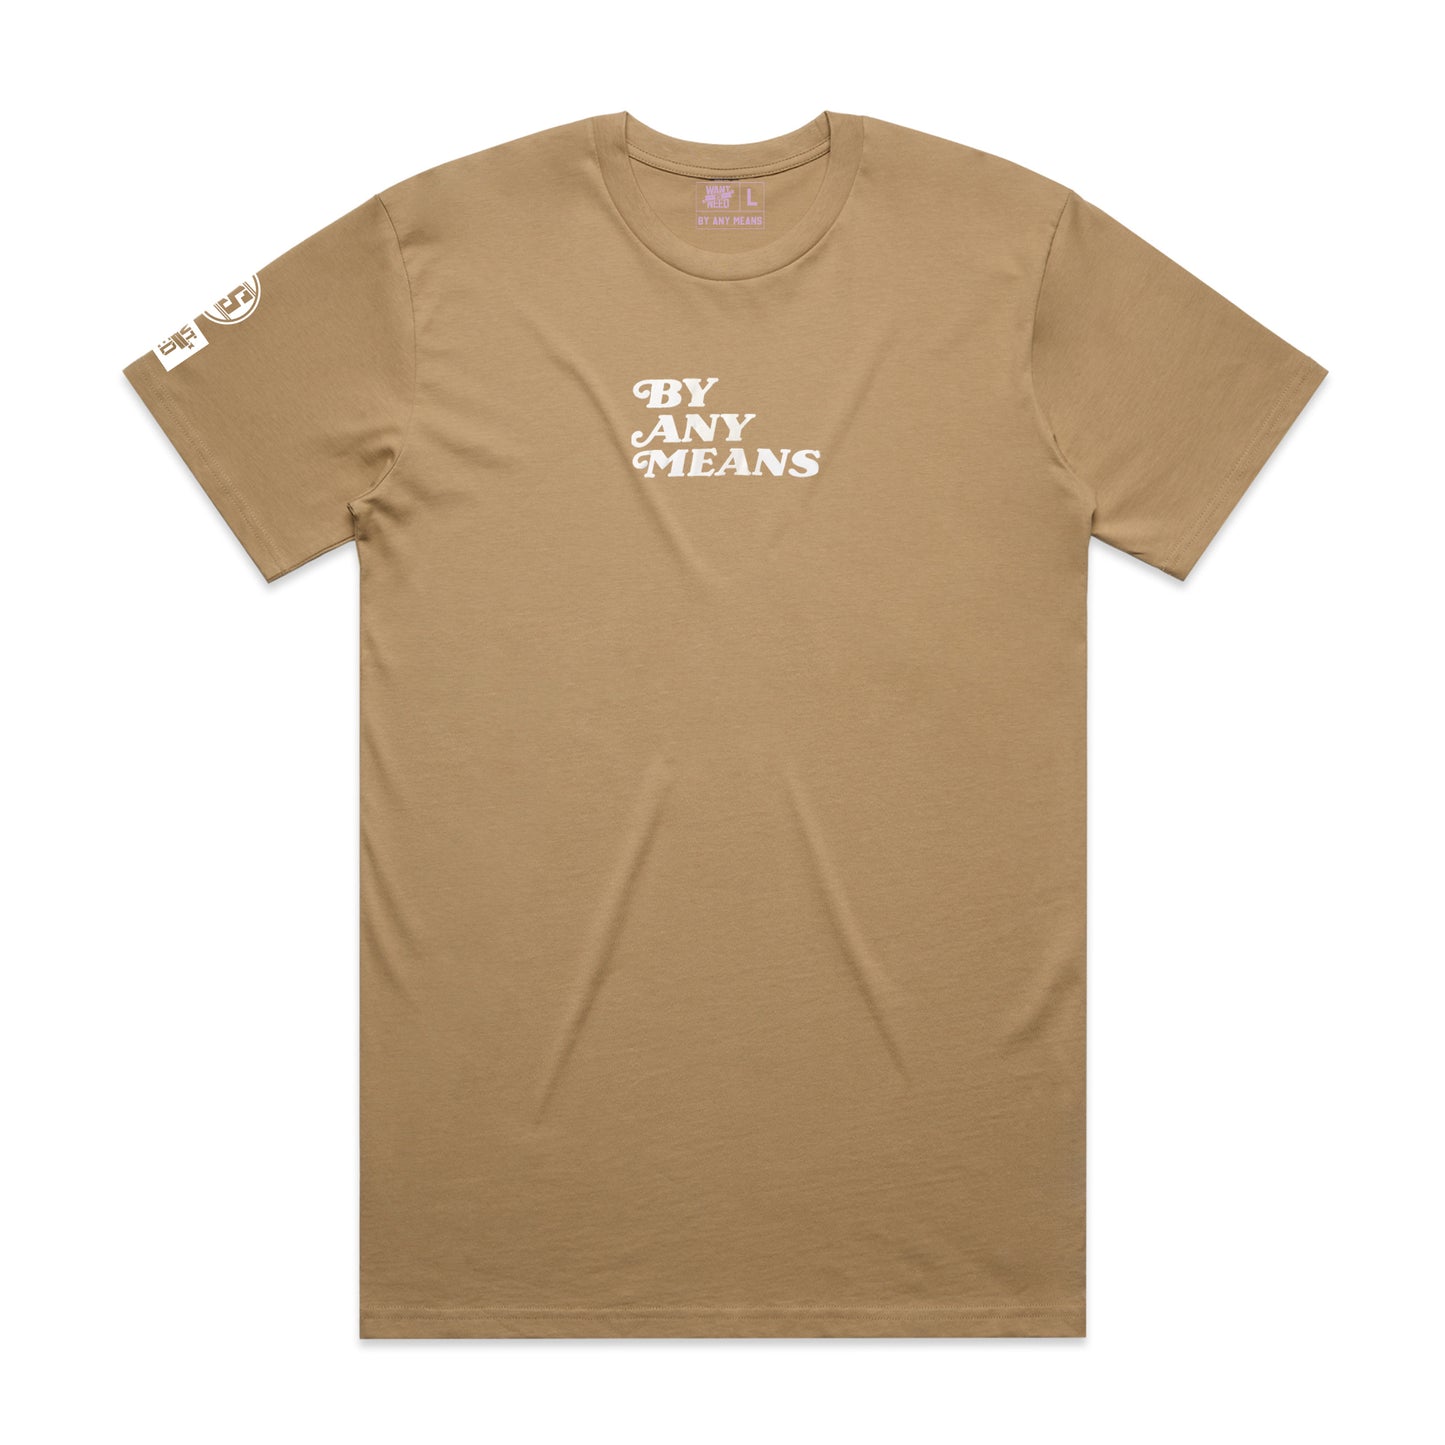 ADULT - BY ANY MEANS PUFF TEE - KHAKI